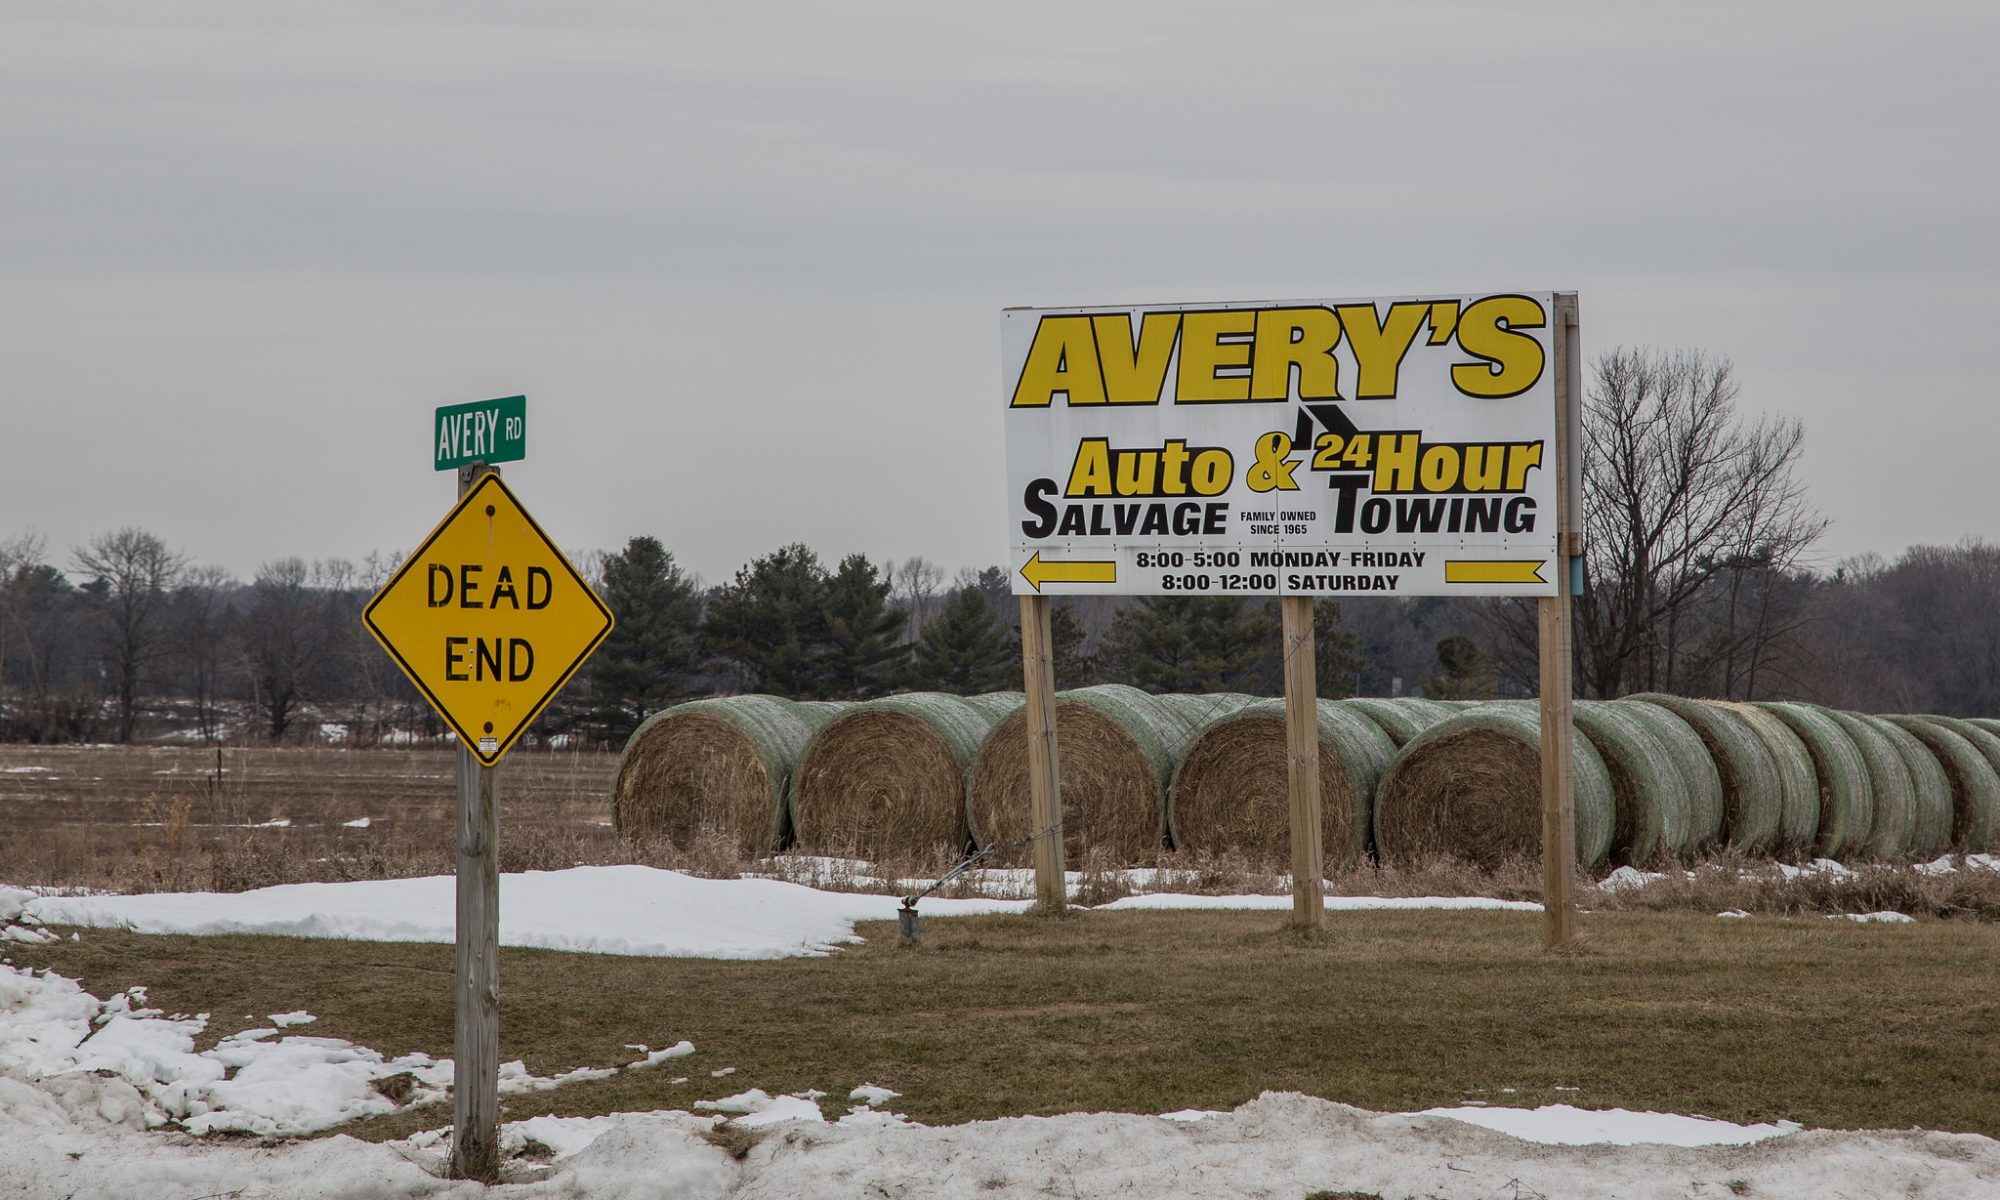 Photograph of a billboard that says Avery's Auto Salvage and 24-Hour Towing